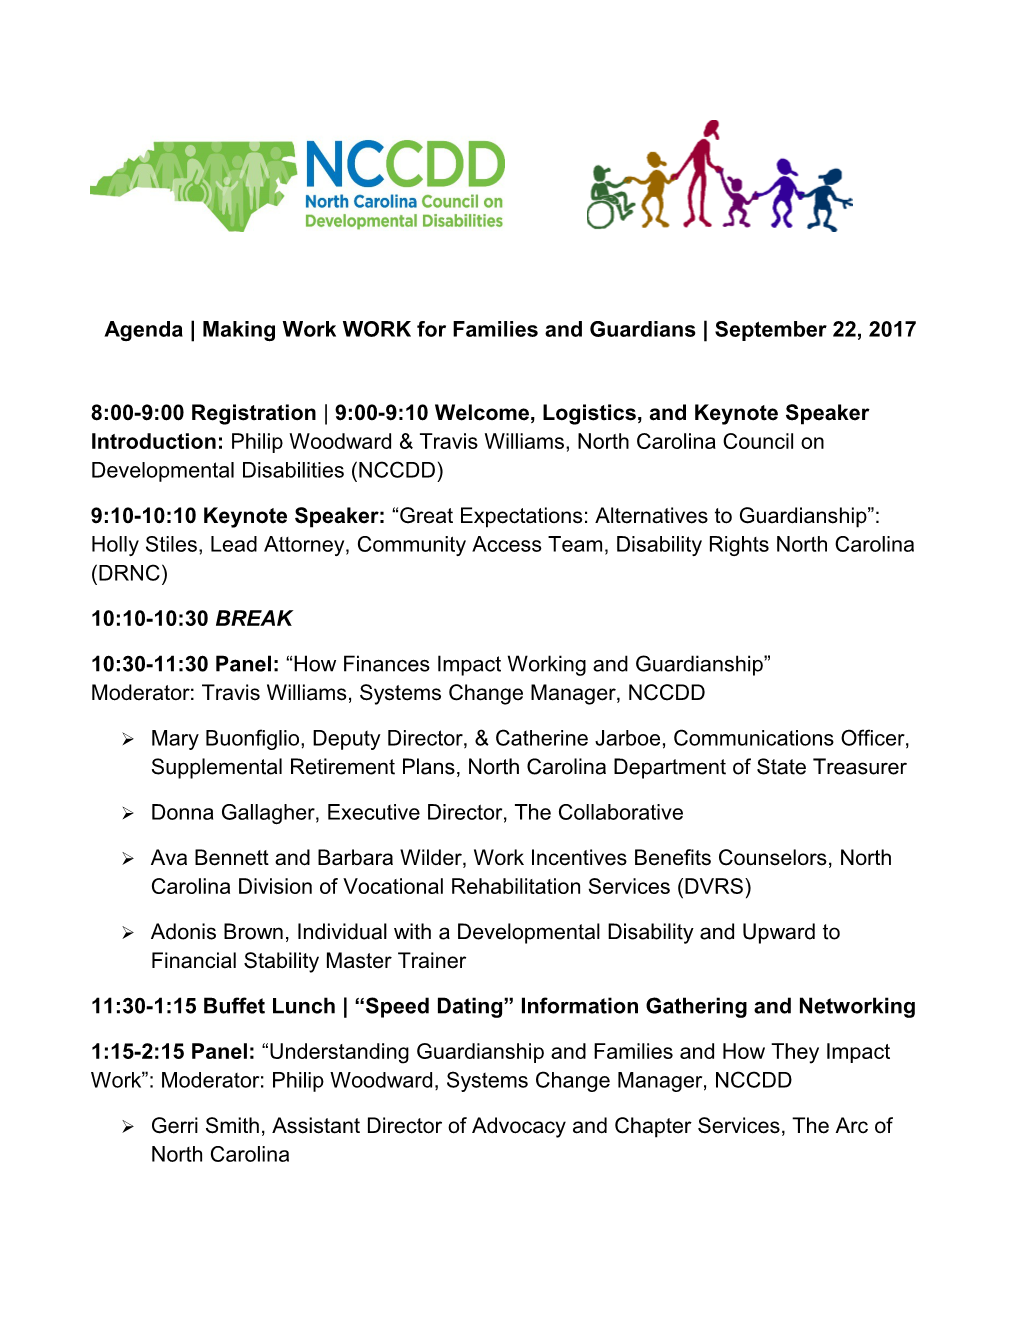 Making Work WORK for Families and Guardians September 22, 2017